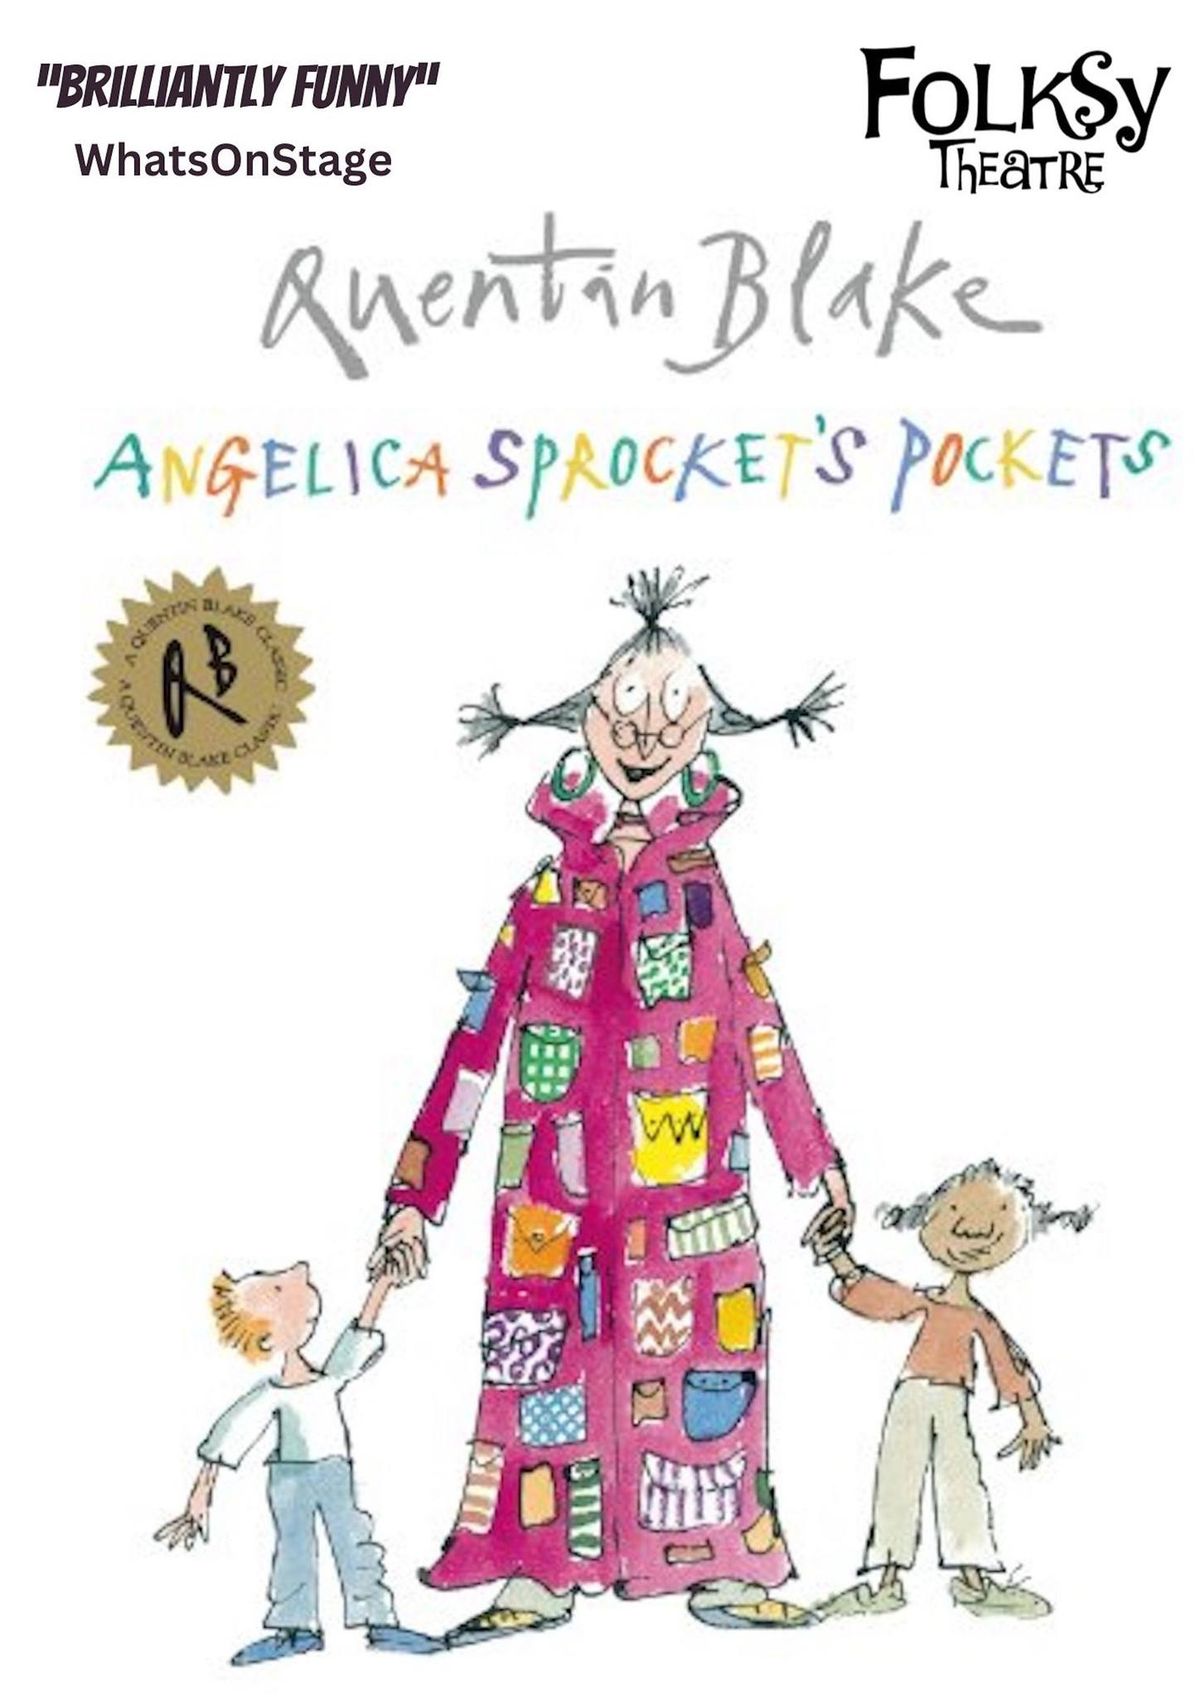 Angelica Sprocket's Pockets with Folksy Theatre